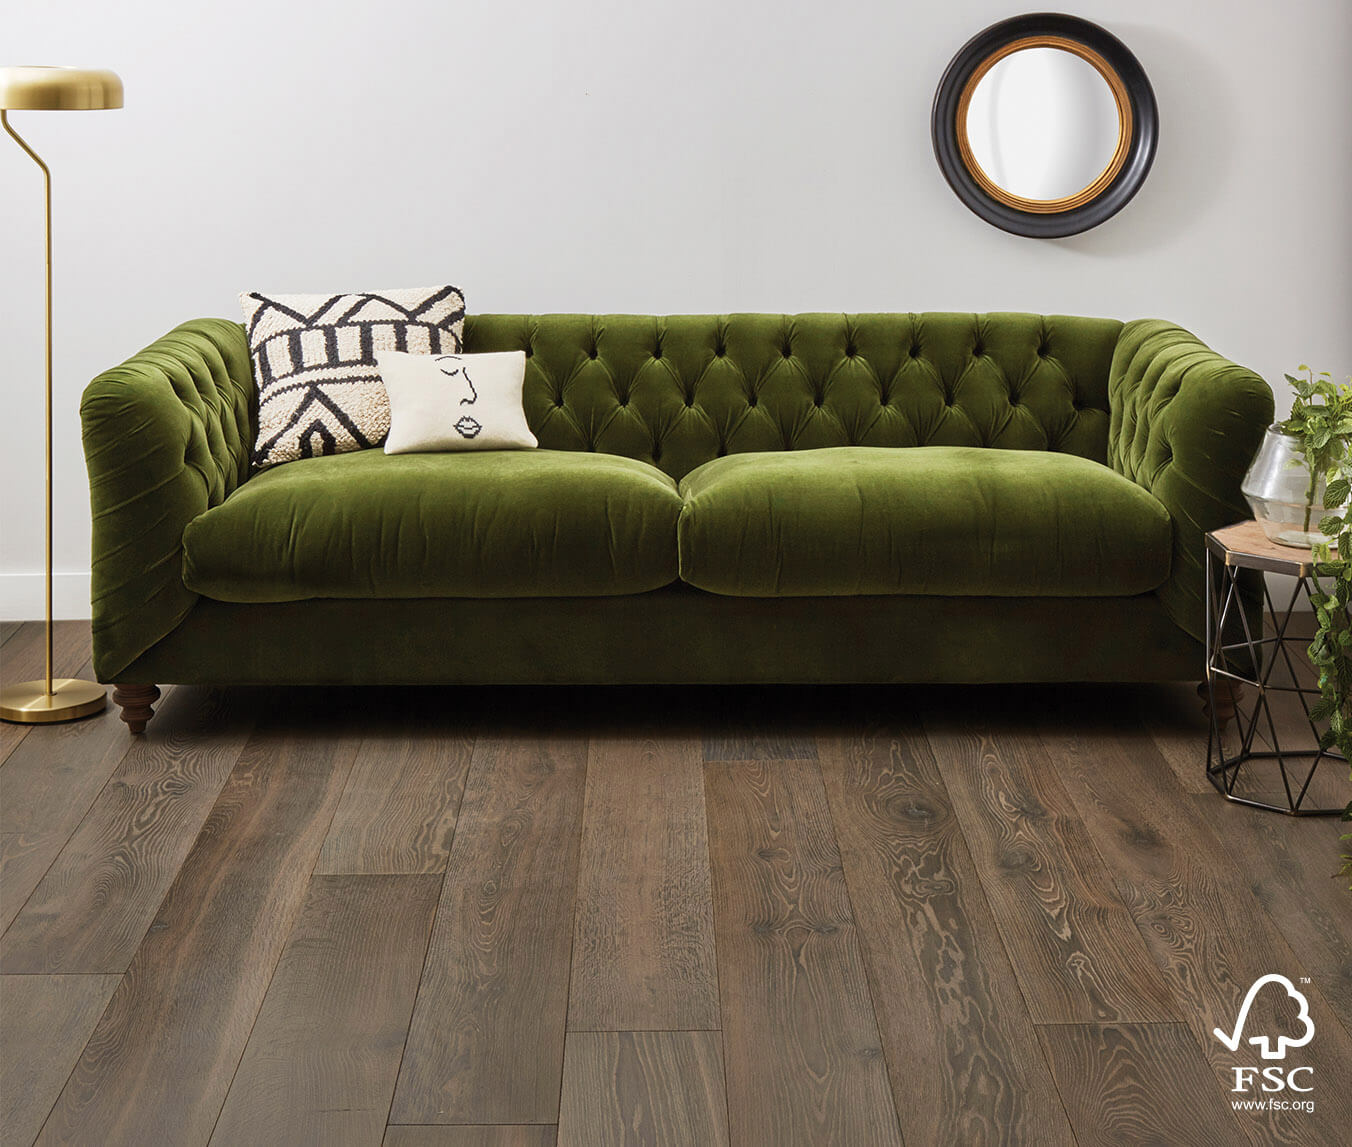 Tolland Oak Plank flooring set against a green couch, side table, floor lamp and mirror